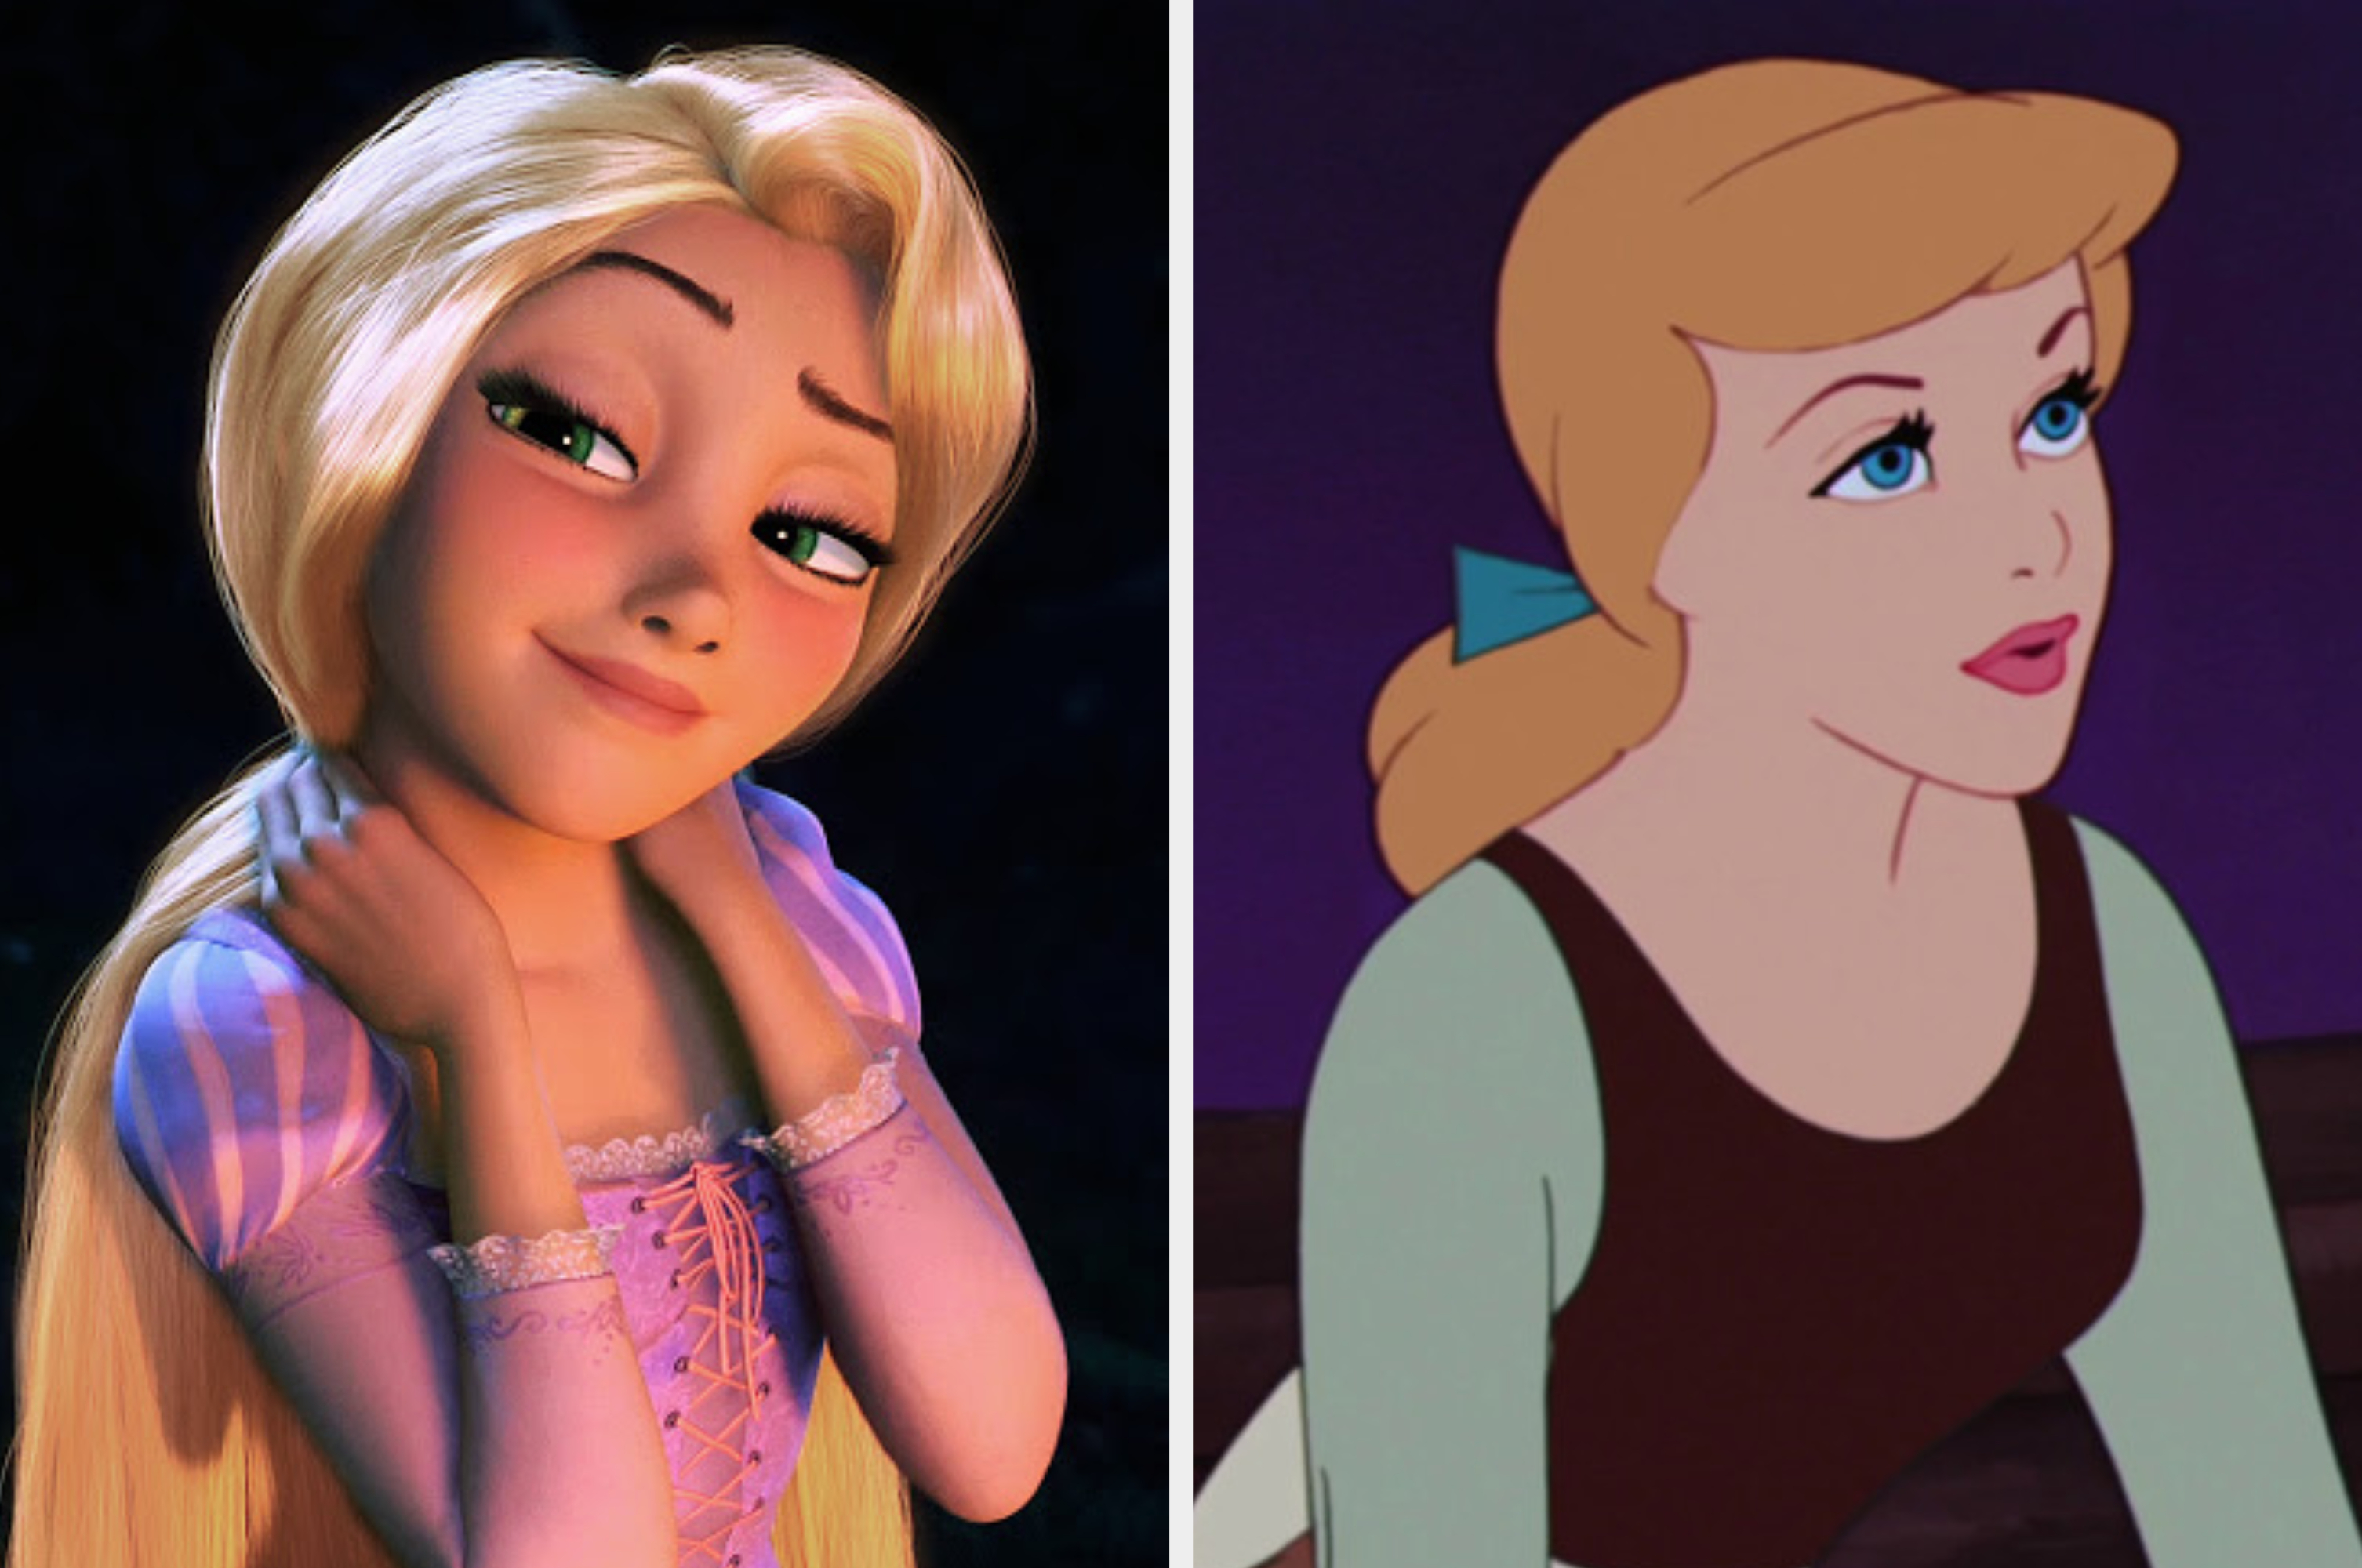 You're Either 100% Rapunzel Or 100% Cinderella — There's No In Between